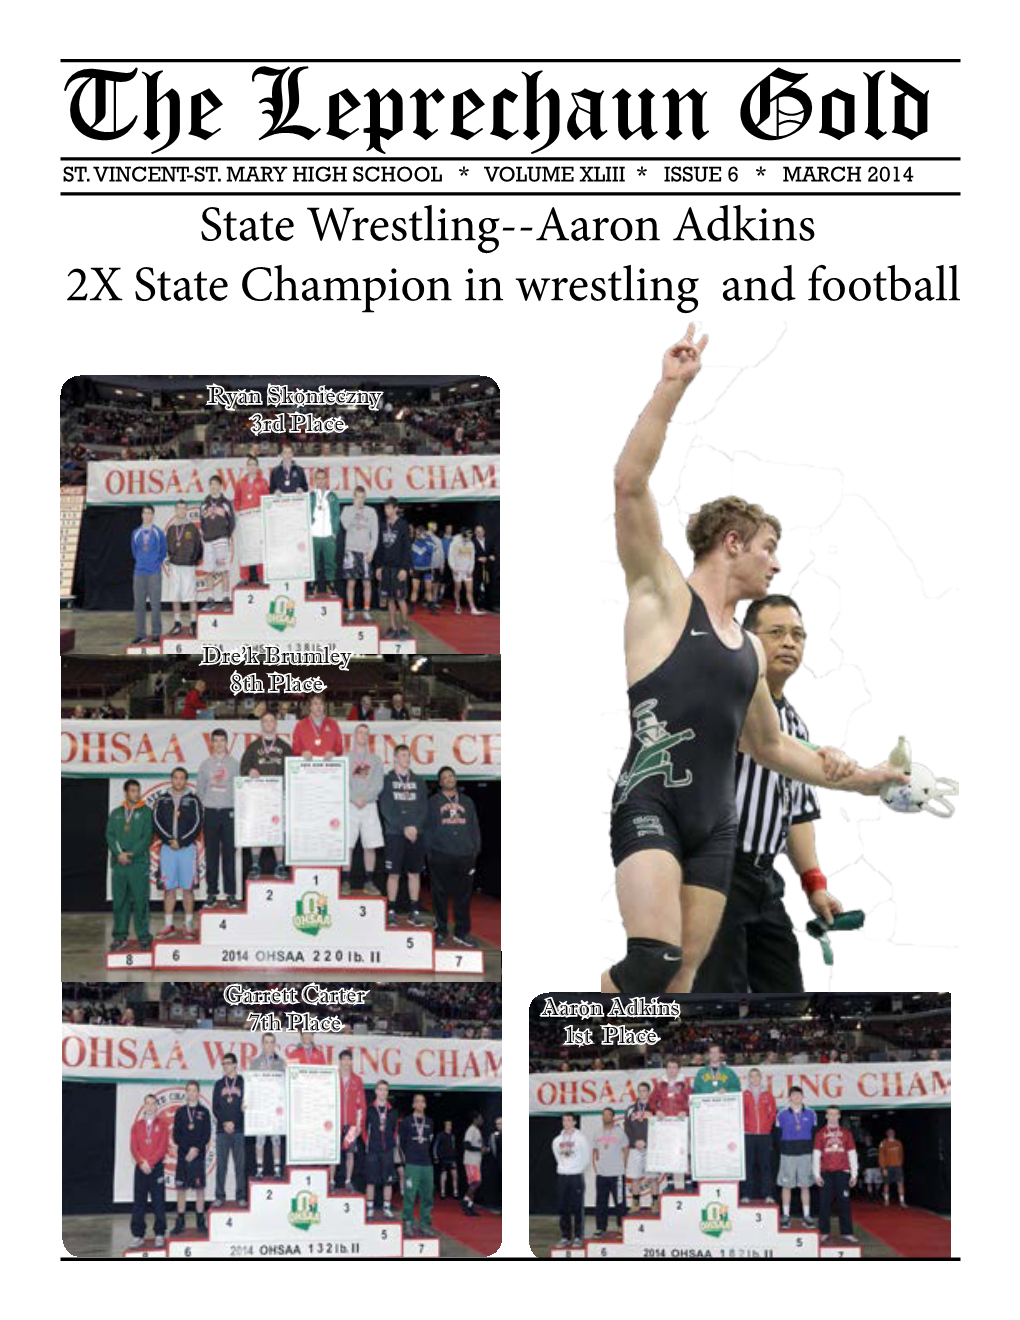 MARCH 2014 State Wrestling--Aaron Adkins 2X State Champion in Wrestling and Football